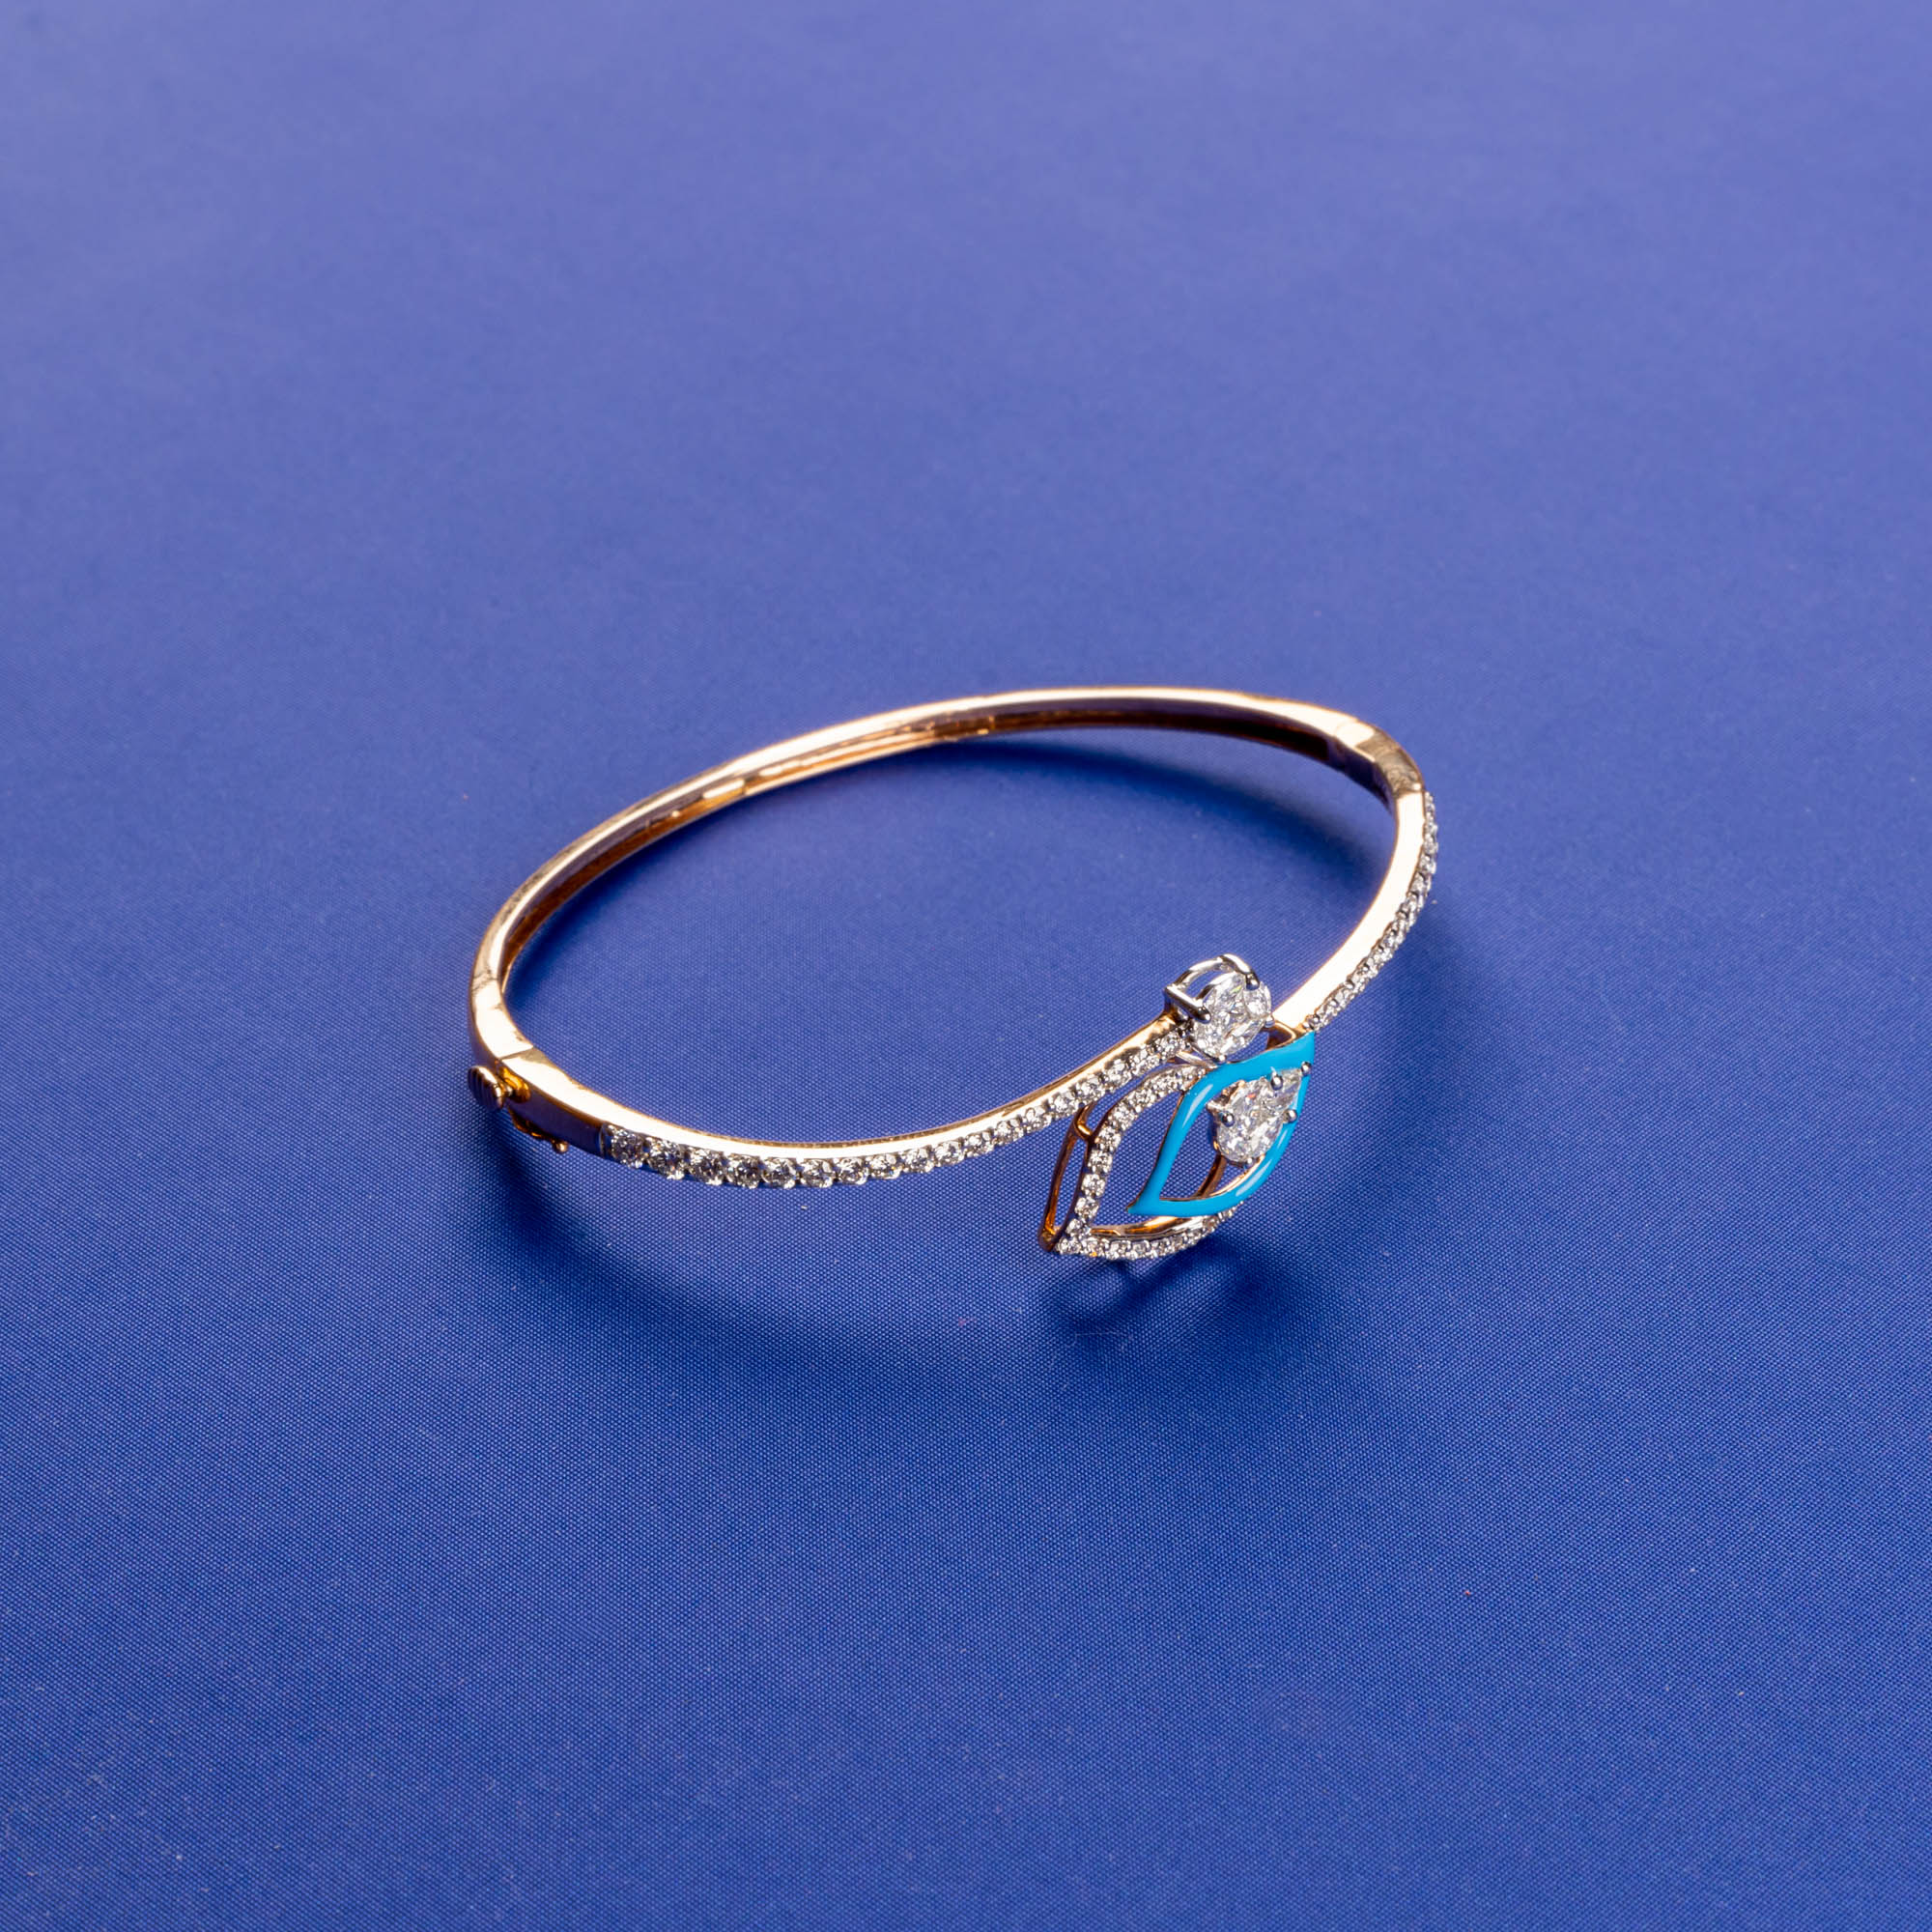 Enigmatic Gaze: Handmade 18K Rose Gold Diamond Bangle with Alluring Eye-shaped Design and Subtle Blue Accents